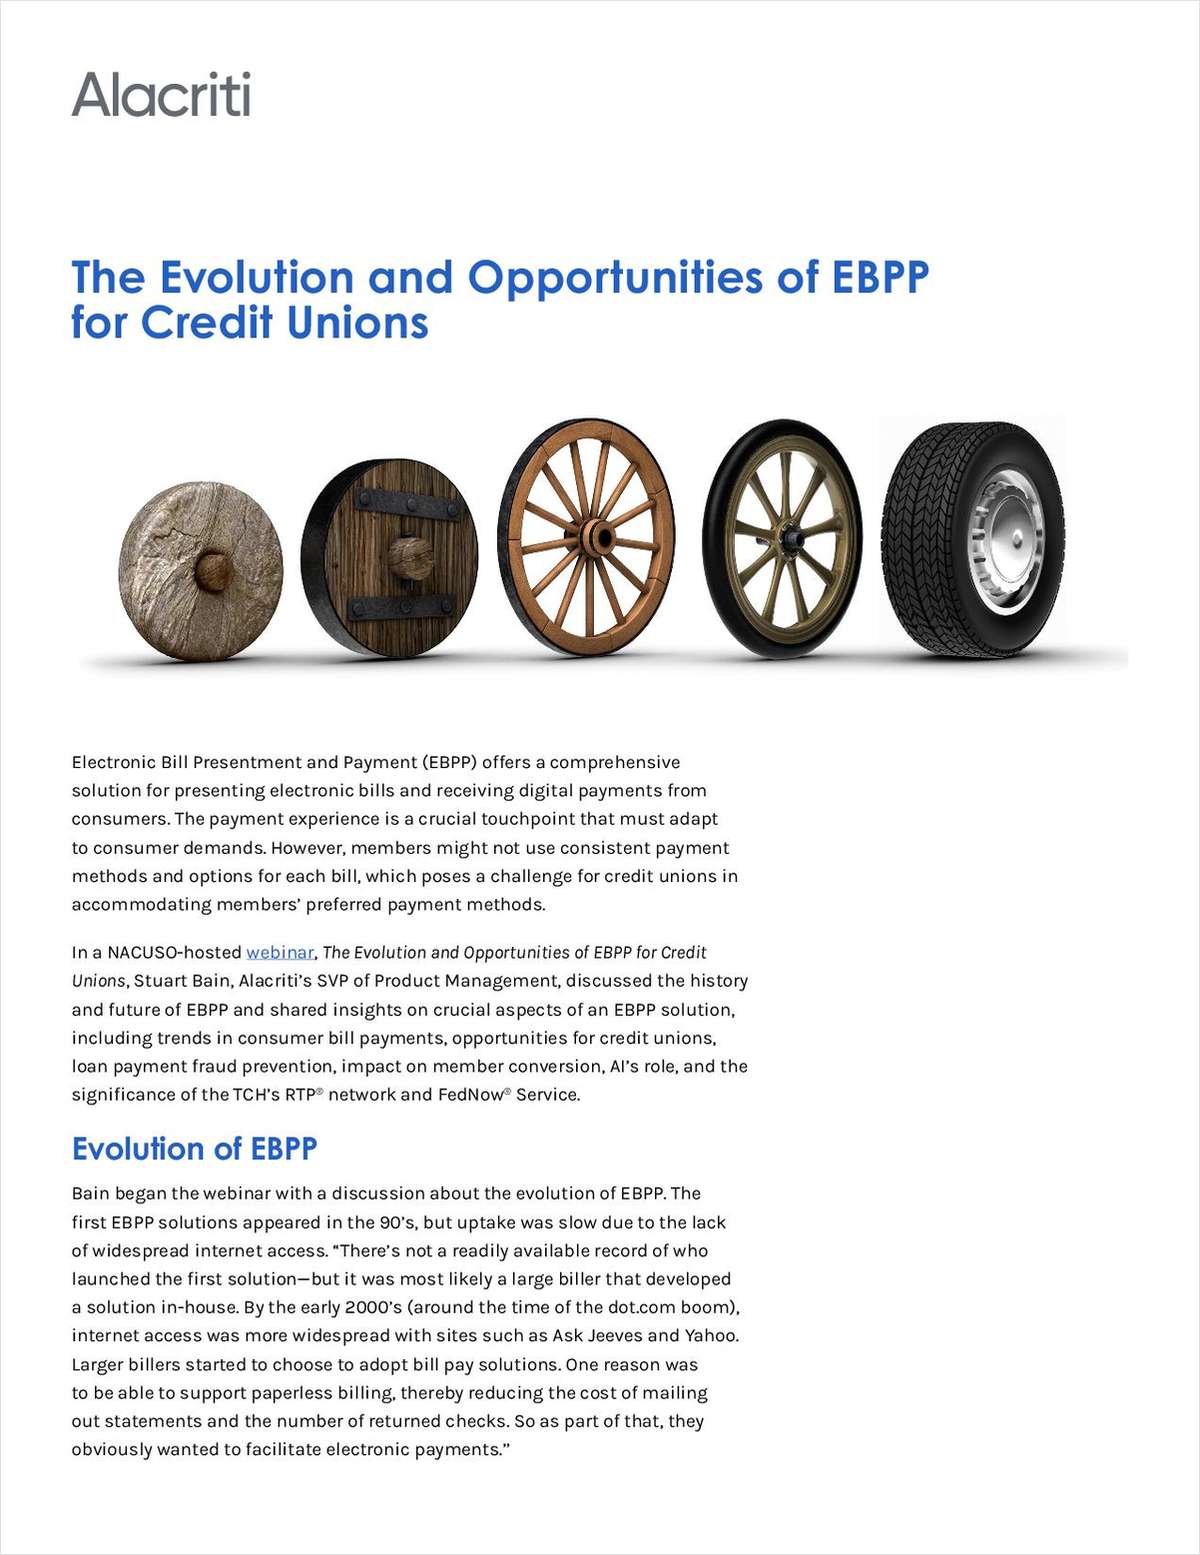 The Evolution and Opportunities of EBPP for Credit Unions link